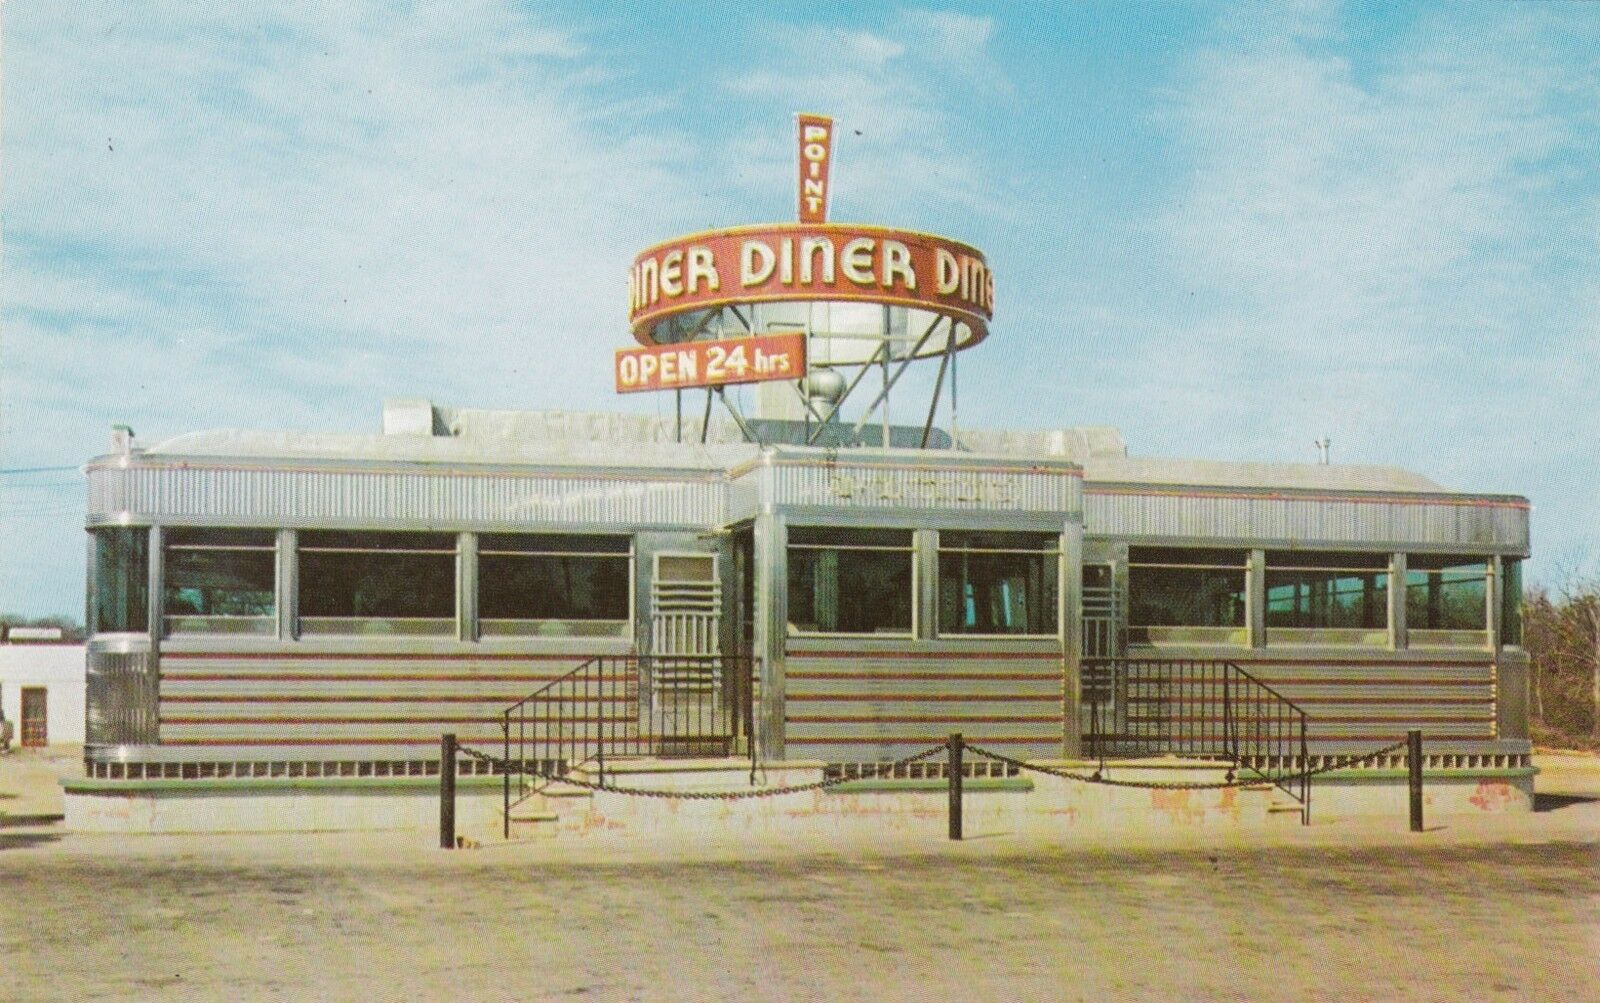 Somers Point - A view of the Point Diner